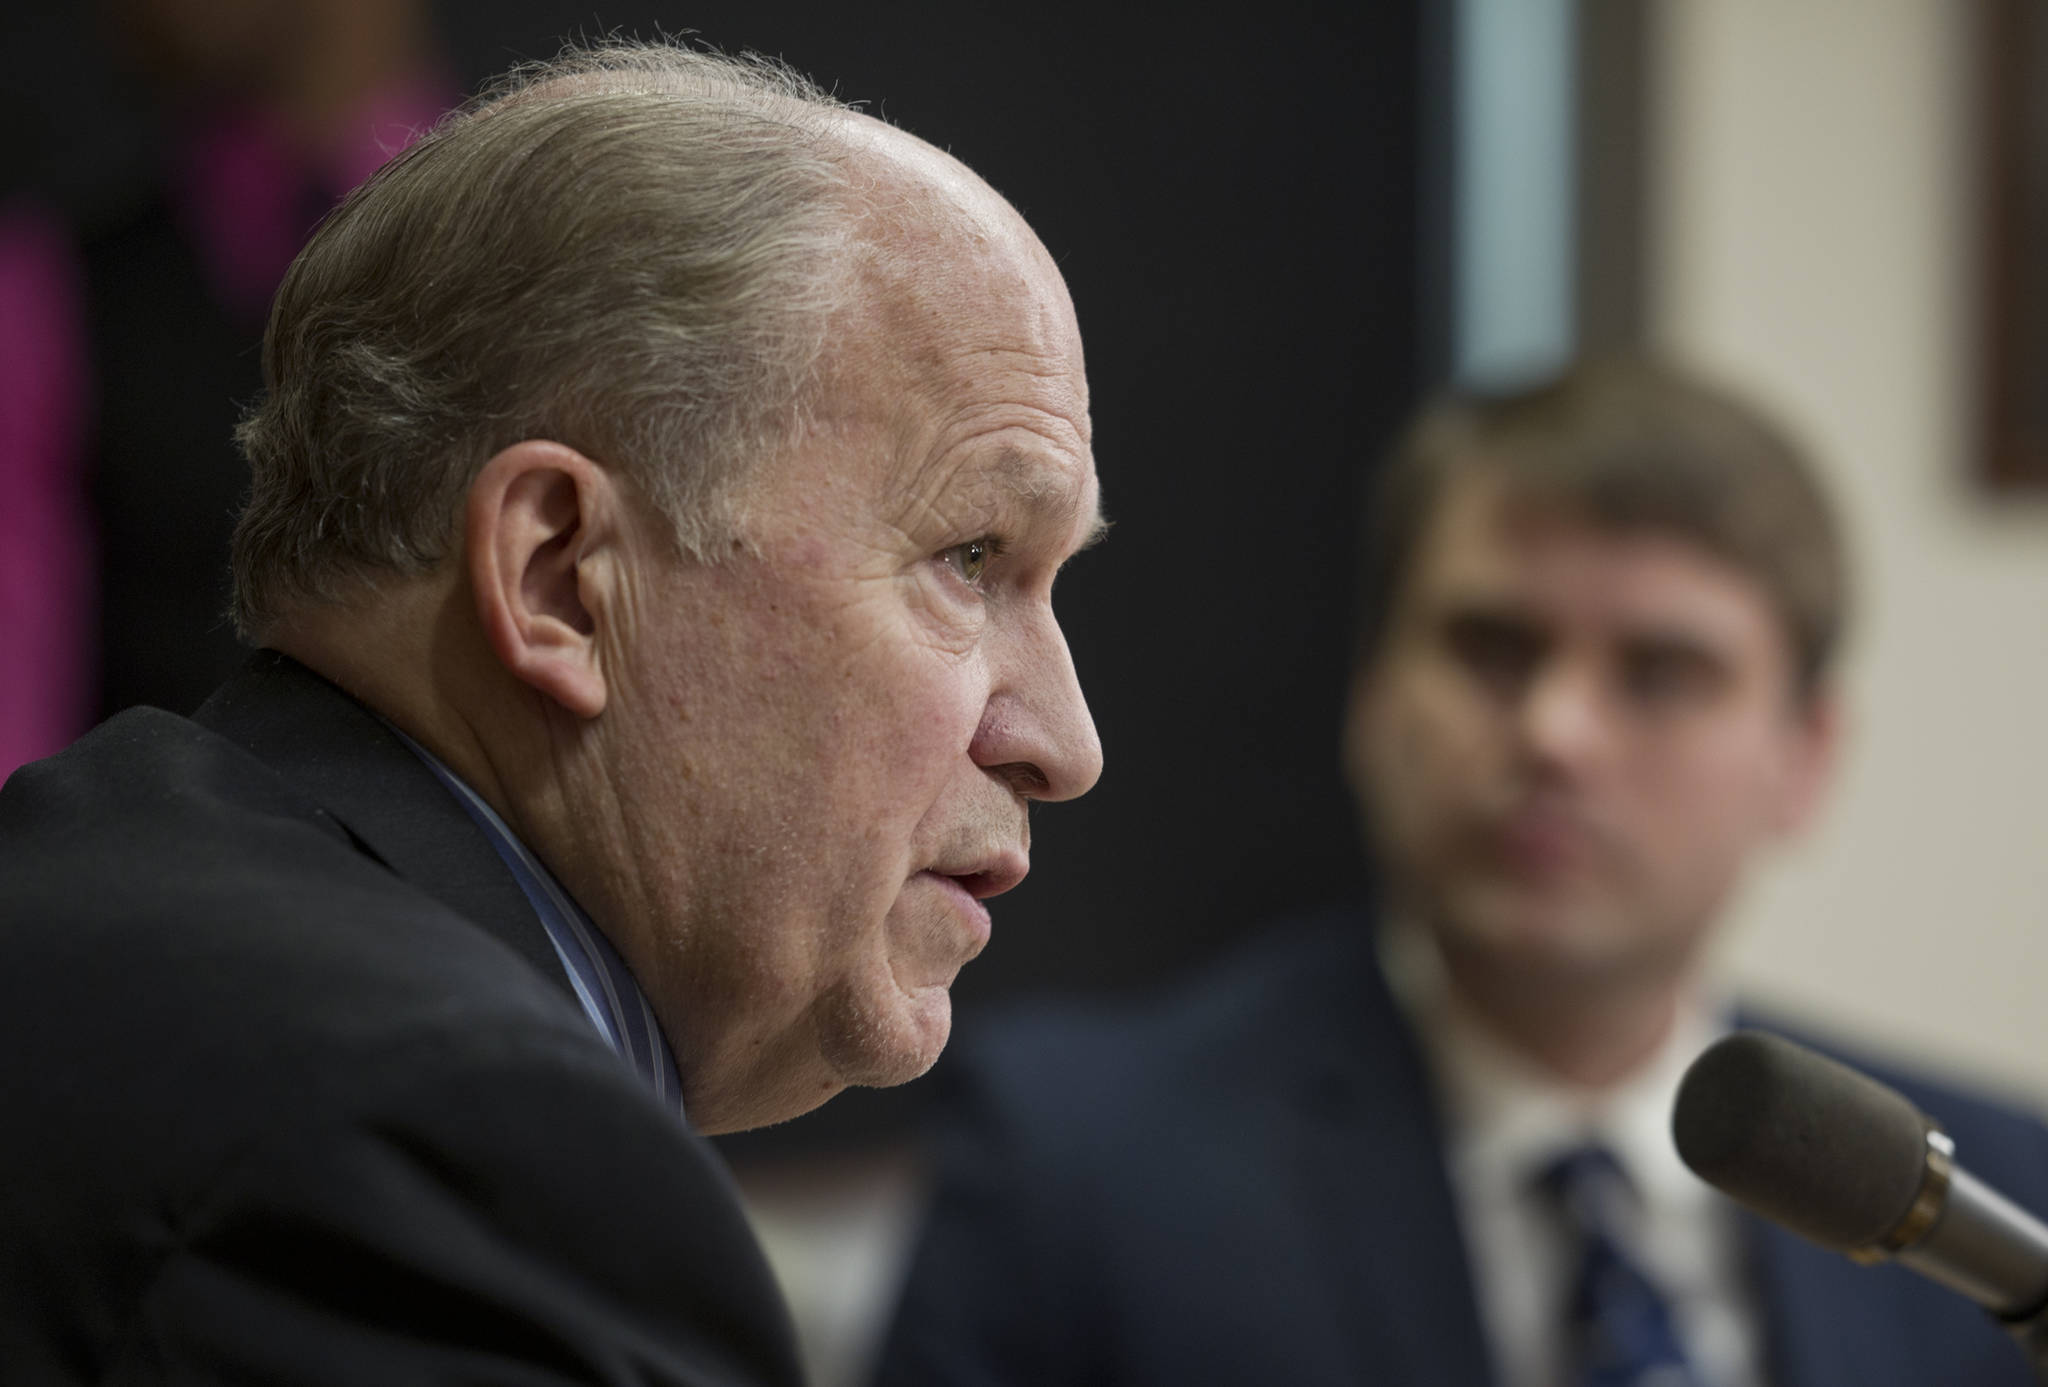 Gov. Bill Walker holds a press conference at the Capitol on Wednesday, April 26, 2017, to speak about the cuts made in services to Alaskans. (Michael Penn | Juneau Empire)